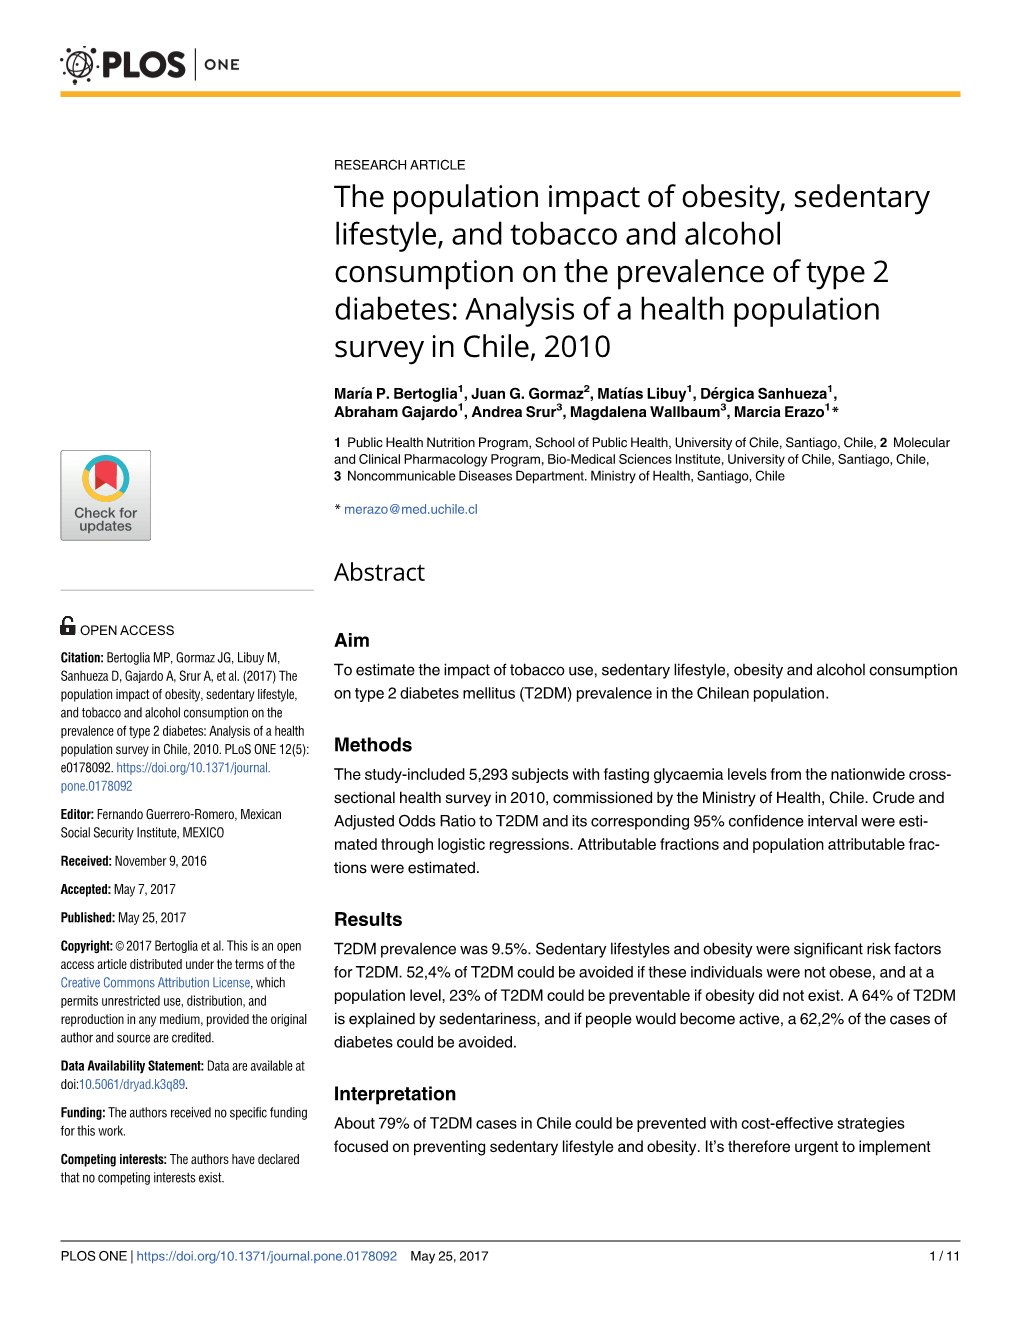 The Population Impact of Obesity, Sedentary Lifestyle, and Tobacco And